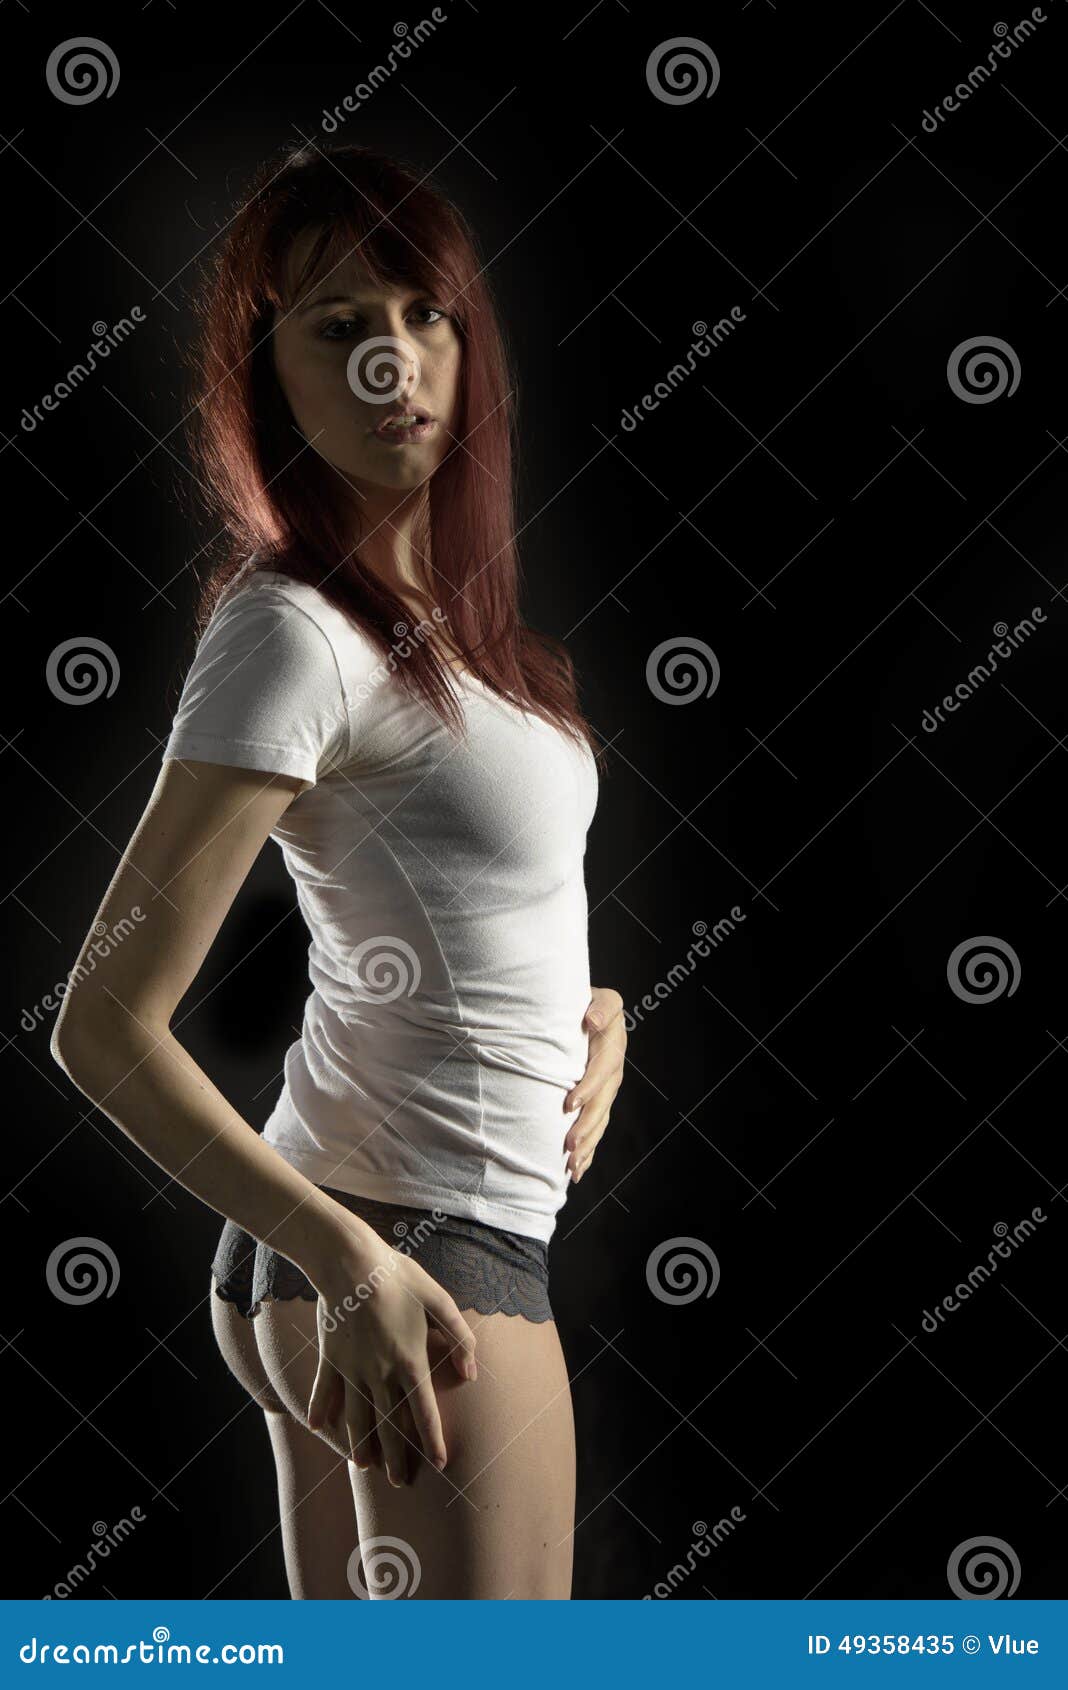 https://thumbs.dreamstime.com/z/woman-posing-white-shirt-panties-gorgeous-young-fitting-gray-isolated-black-background-49358435.jpg